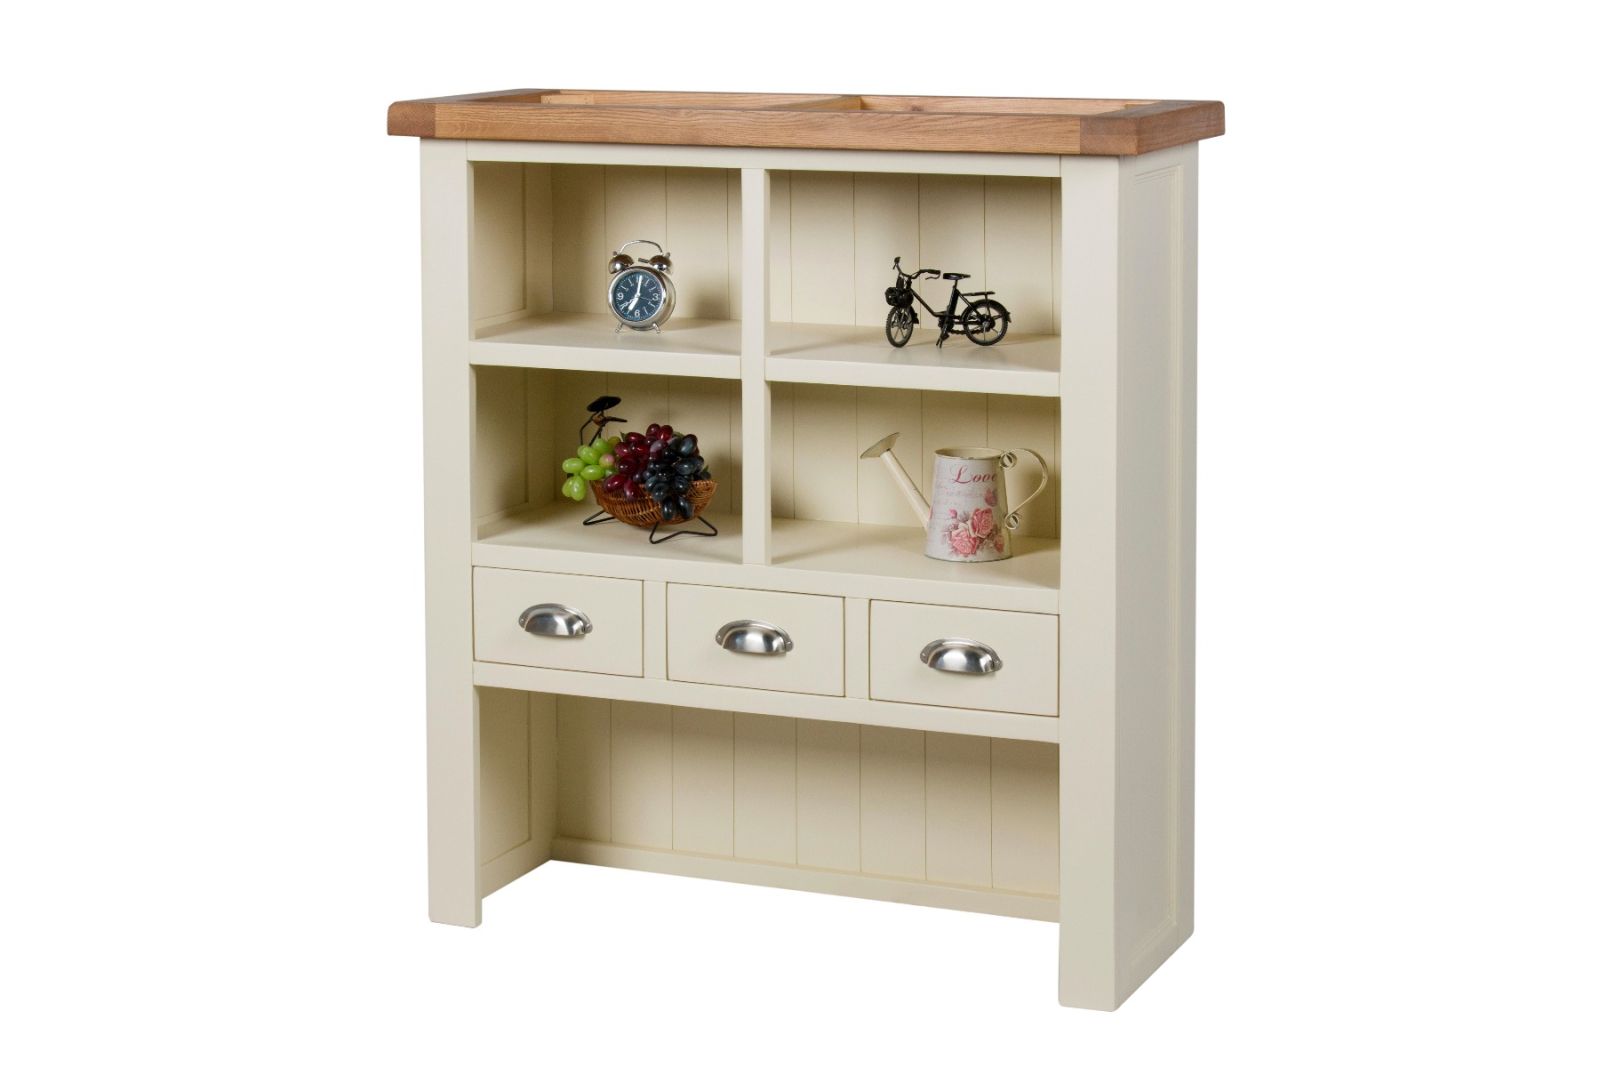 Country Cottage Cream Painted Hutch Unit for combining with sideboard